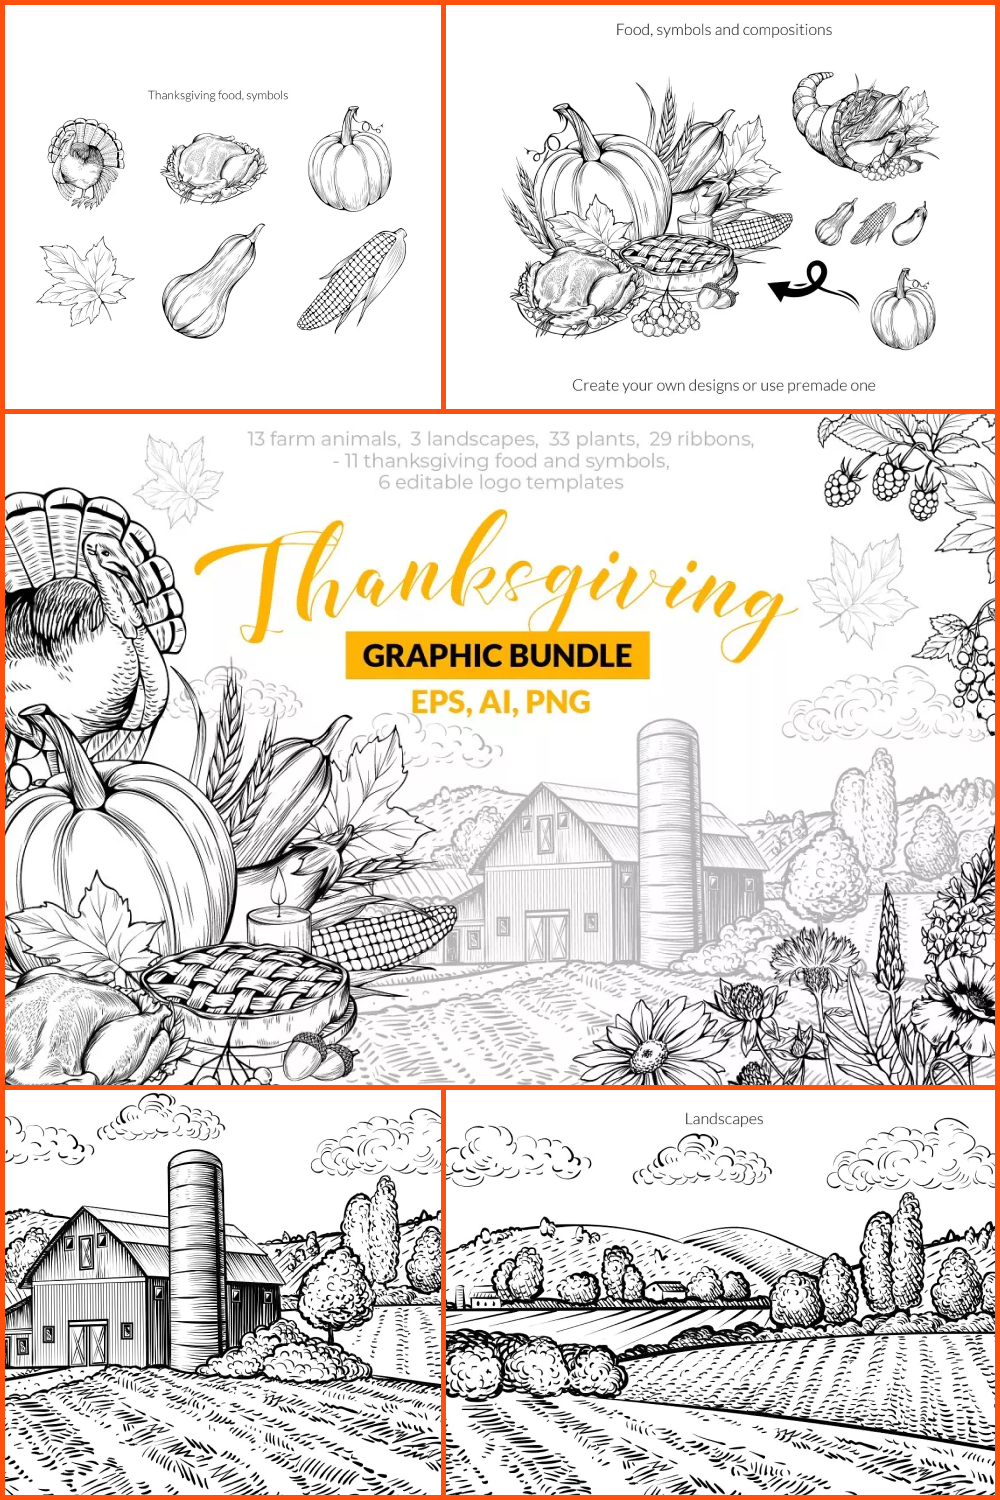 Collage of sketches of images of pumpkins, farms, fields for Thanksgiving.